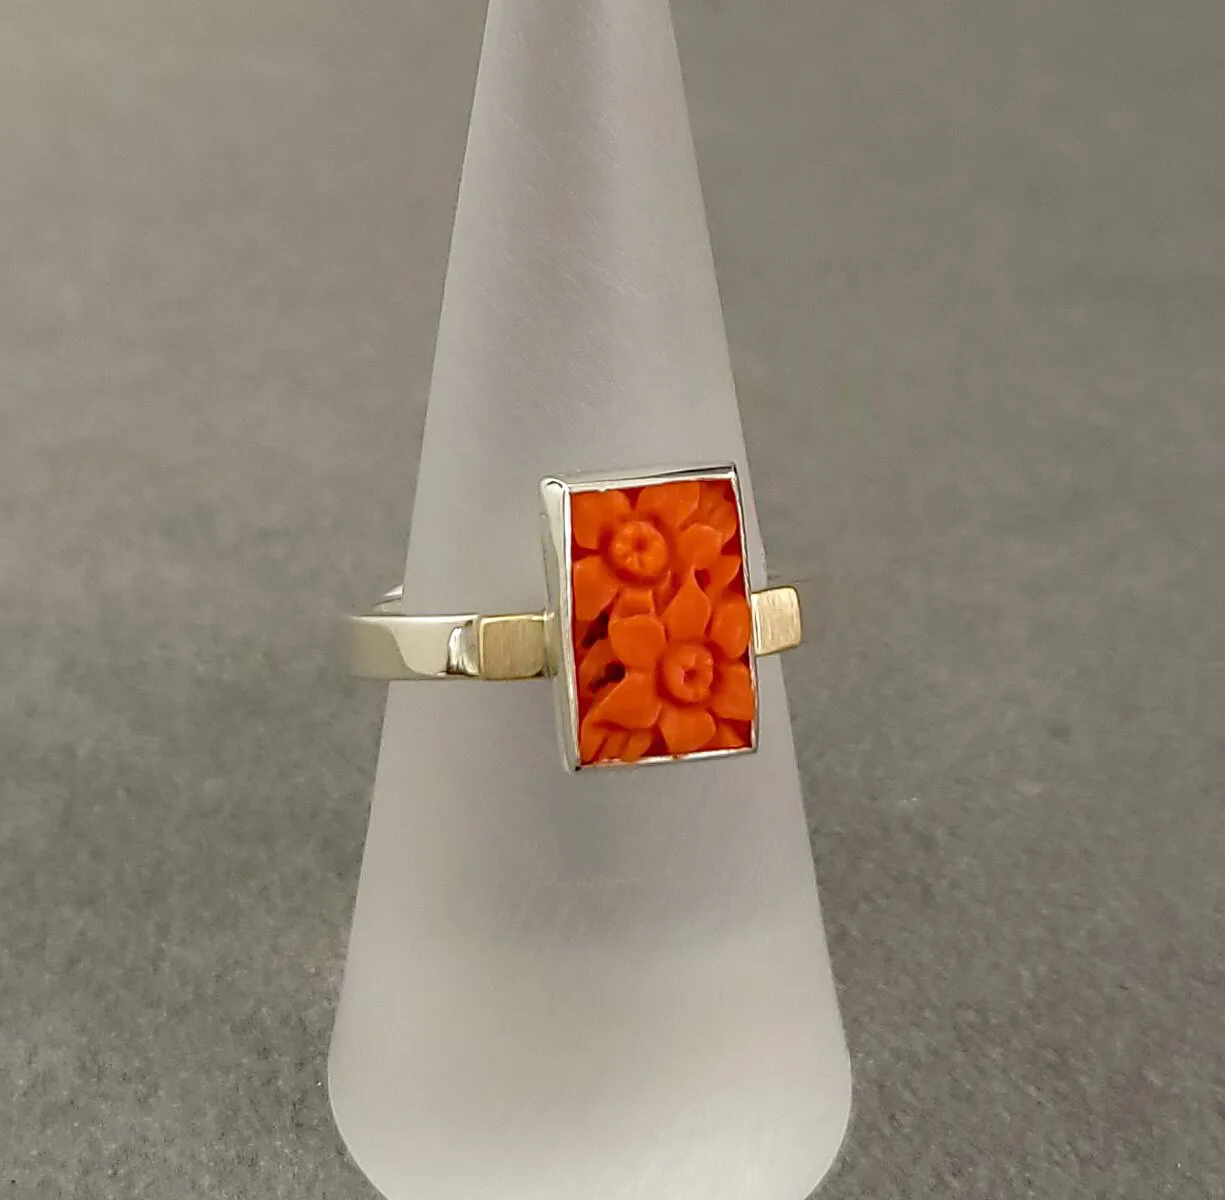 coral ring